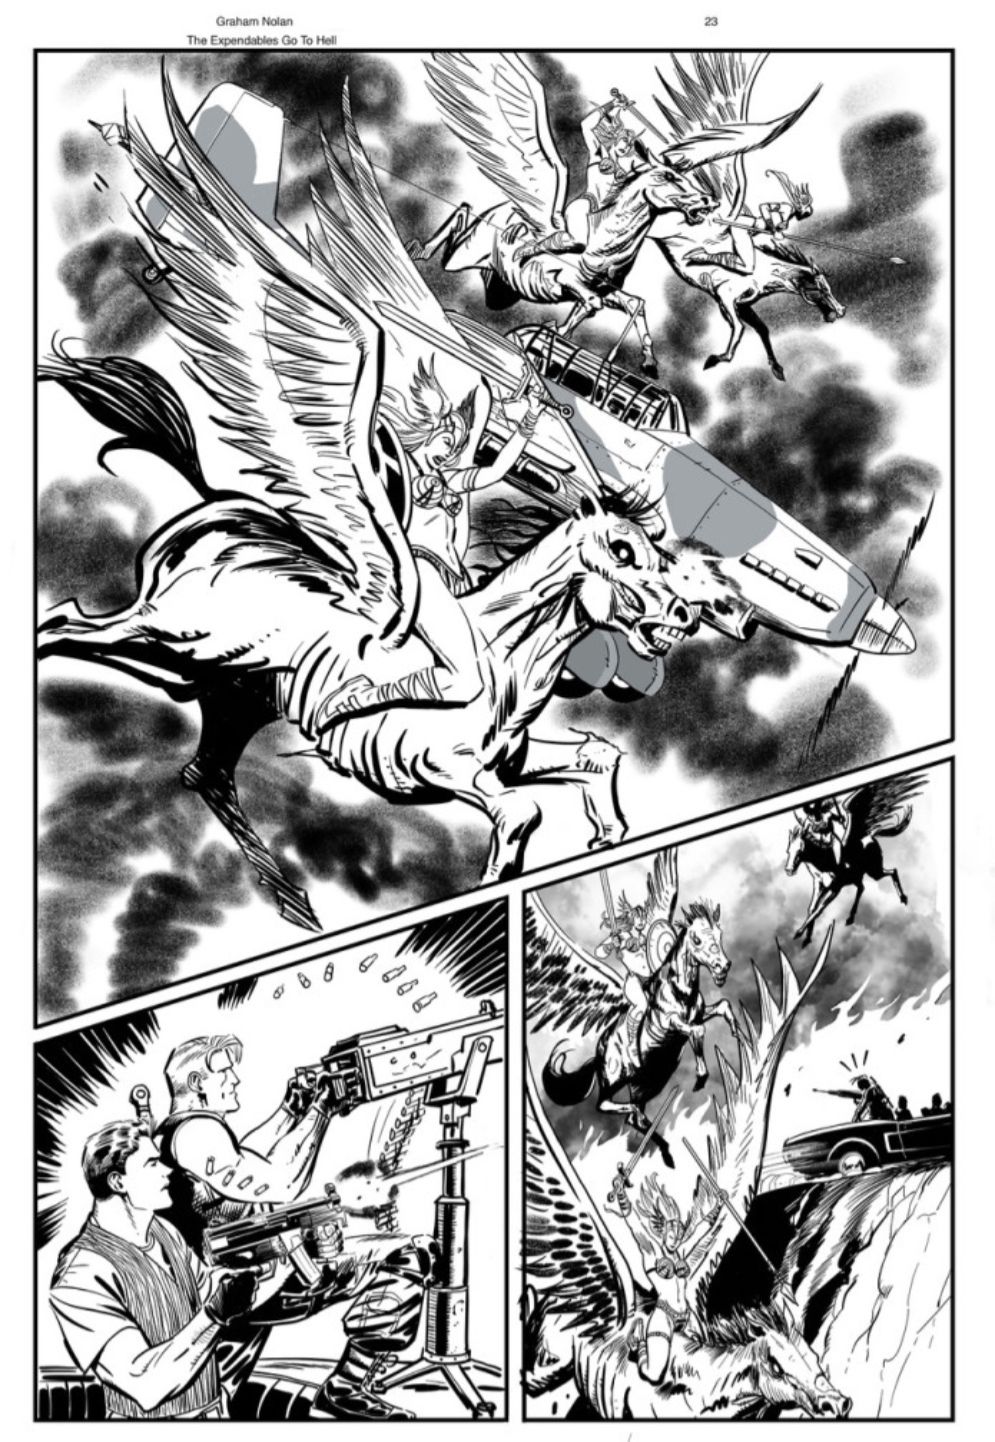 The Expendables Go To Hell Graphic Novel Page 23